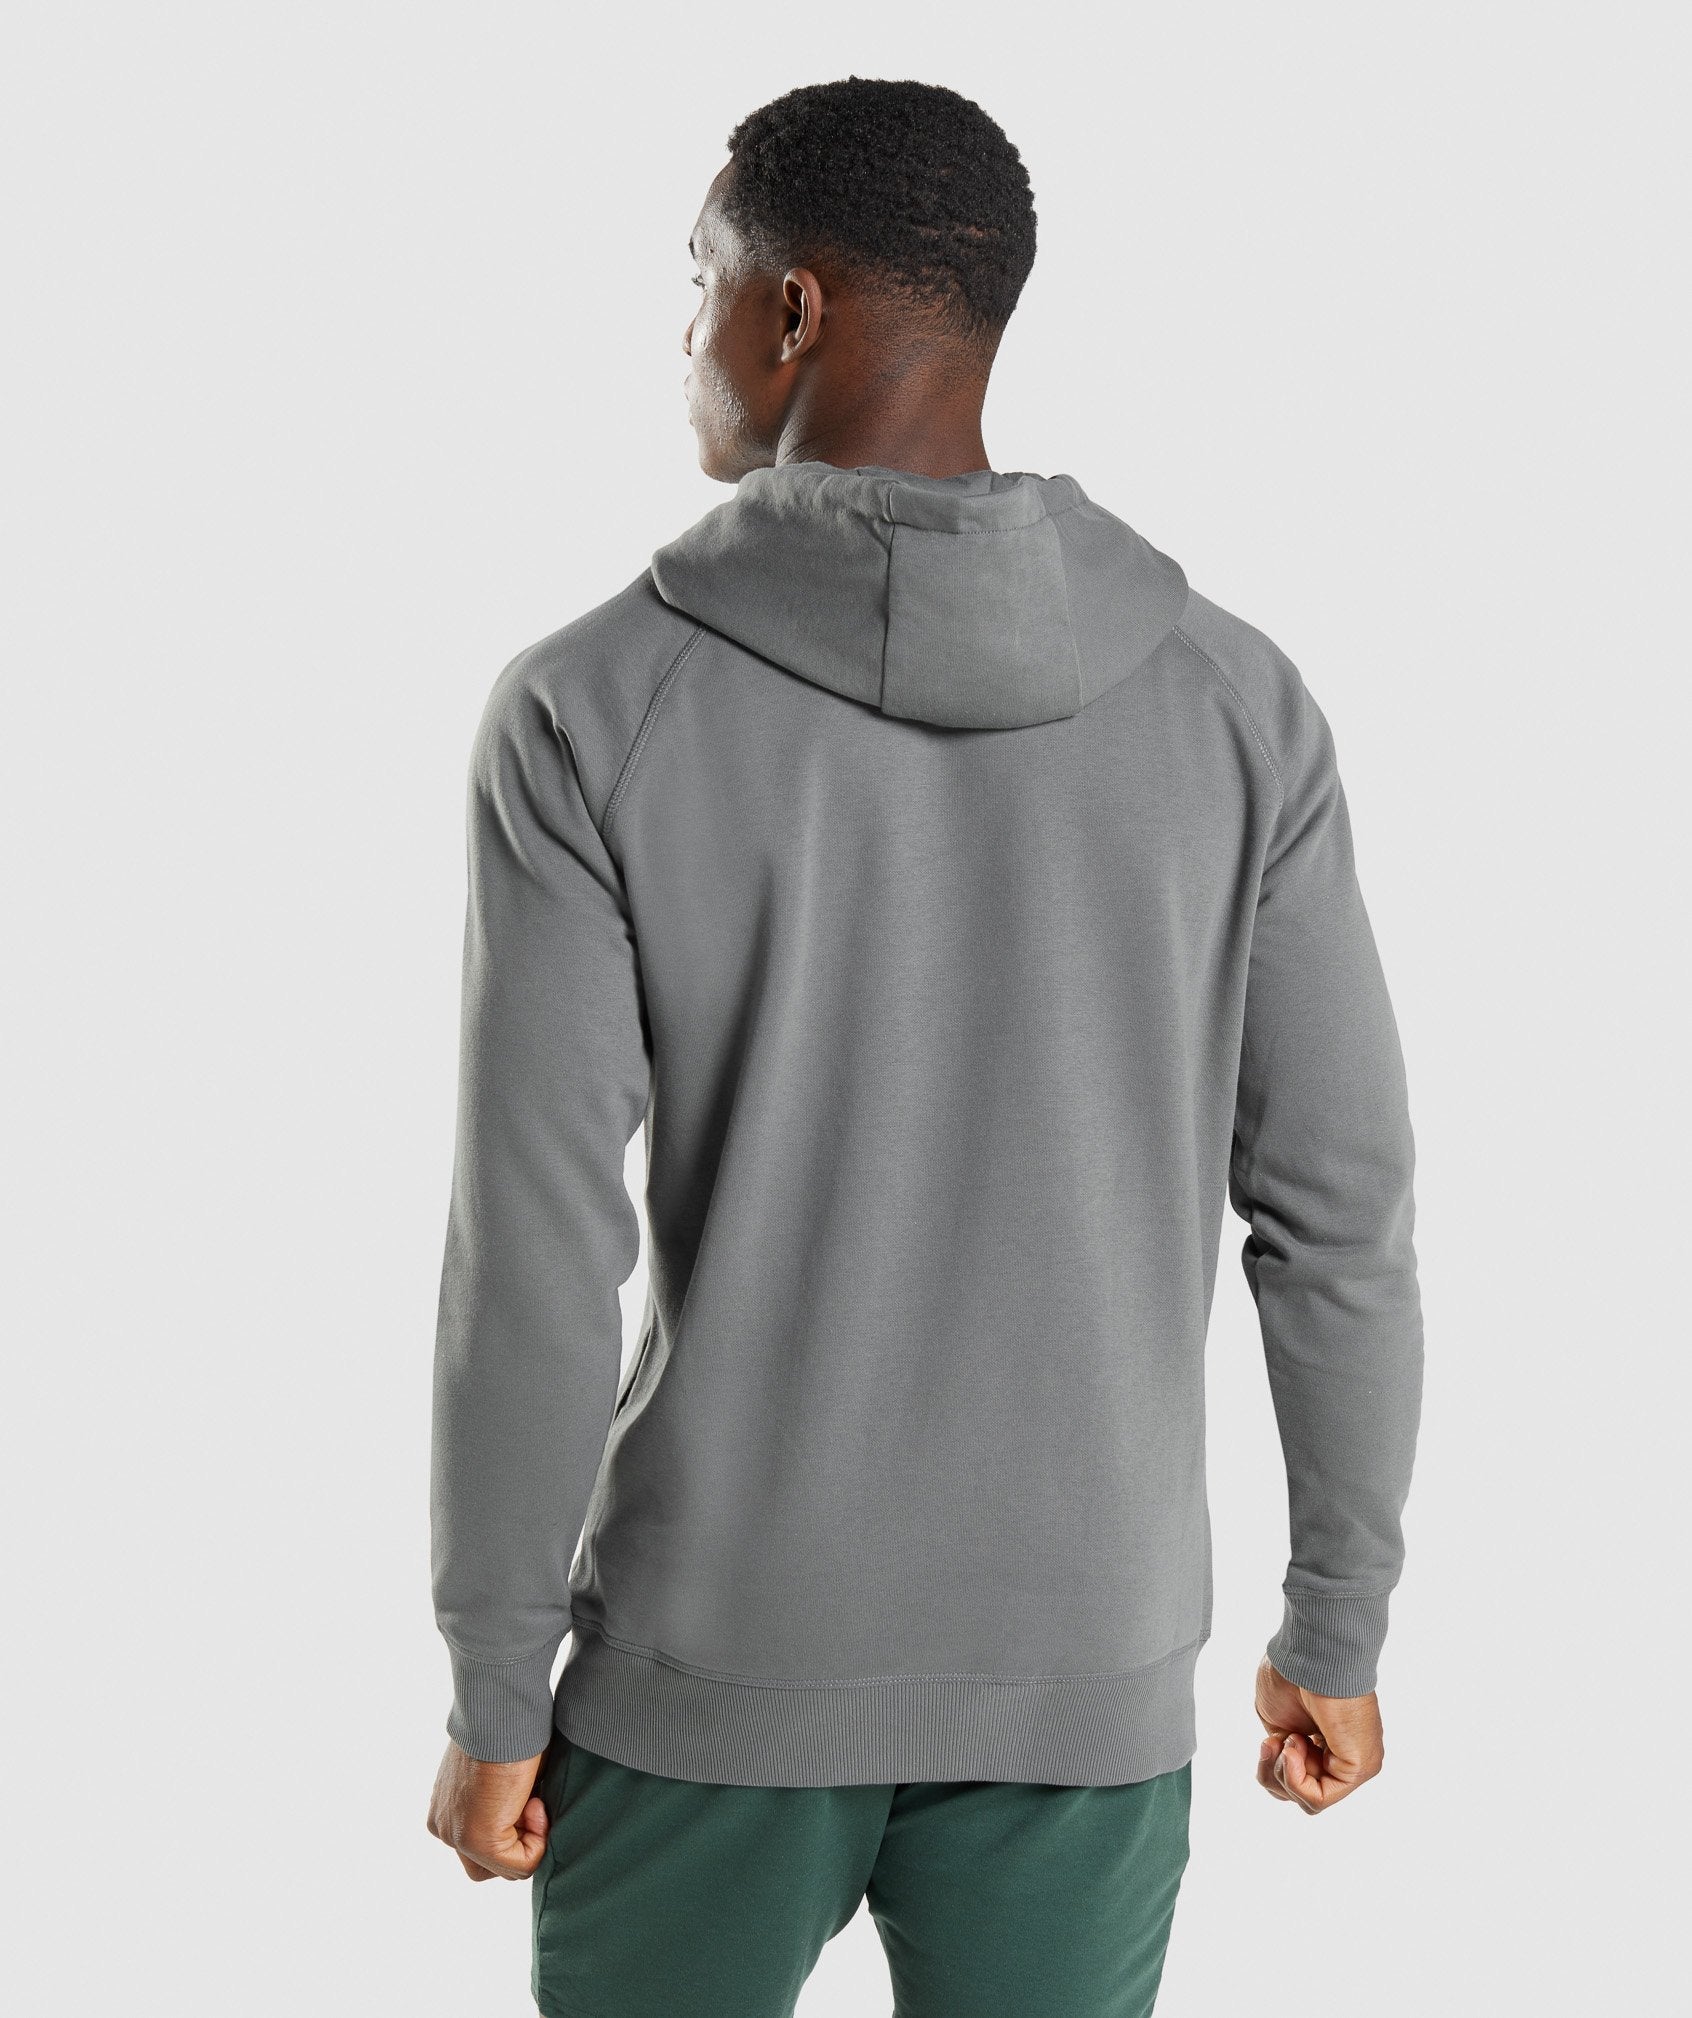 Sharkhead Infill Hoodie in Charcoal - view 2